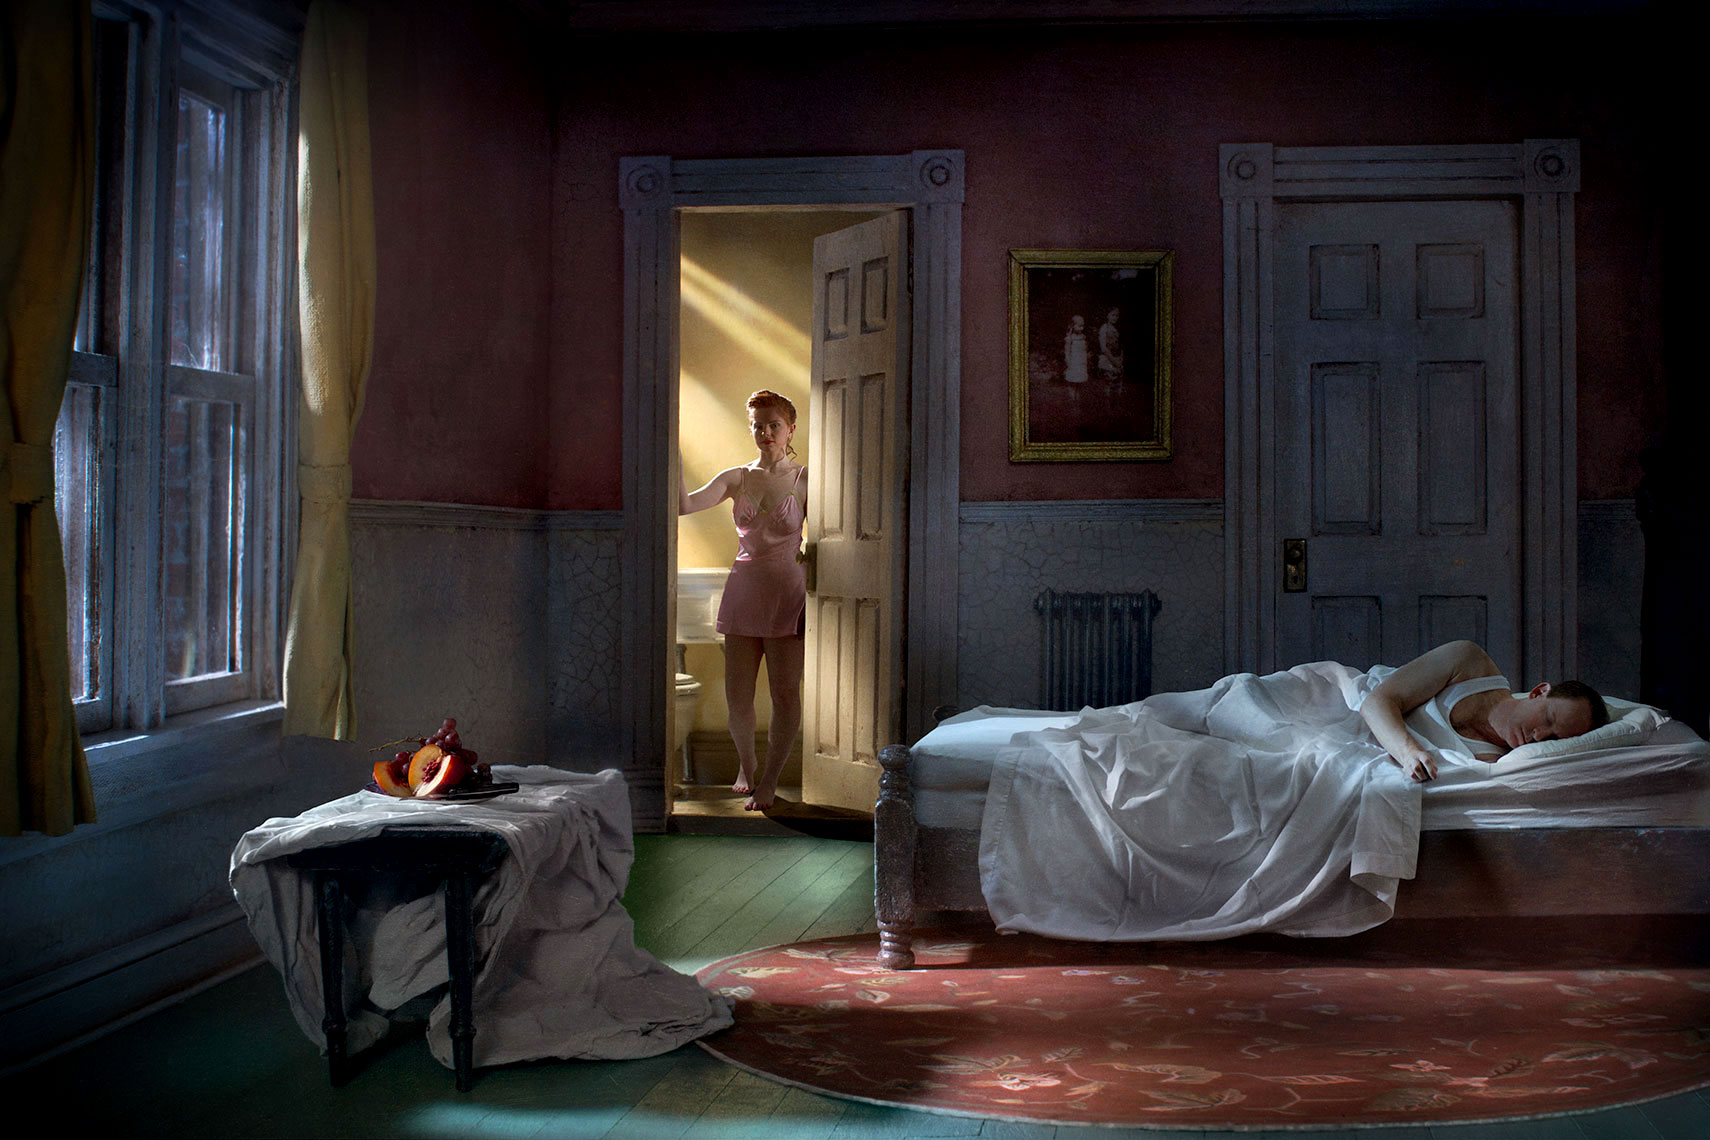 1940s’ New York apartment bedroom at night, a young woman wearing a slip emerges backlit from the bathroom in the background while her partner sleeps in the bed in the foreground, and a mysterious still life sits on a piano bench by the window, glowing in the moonlight.